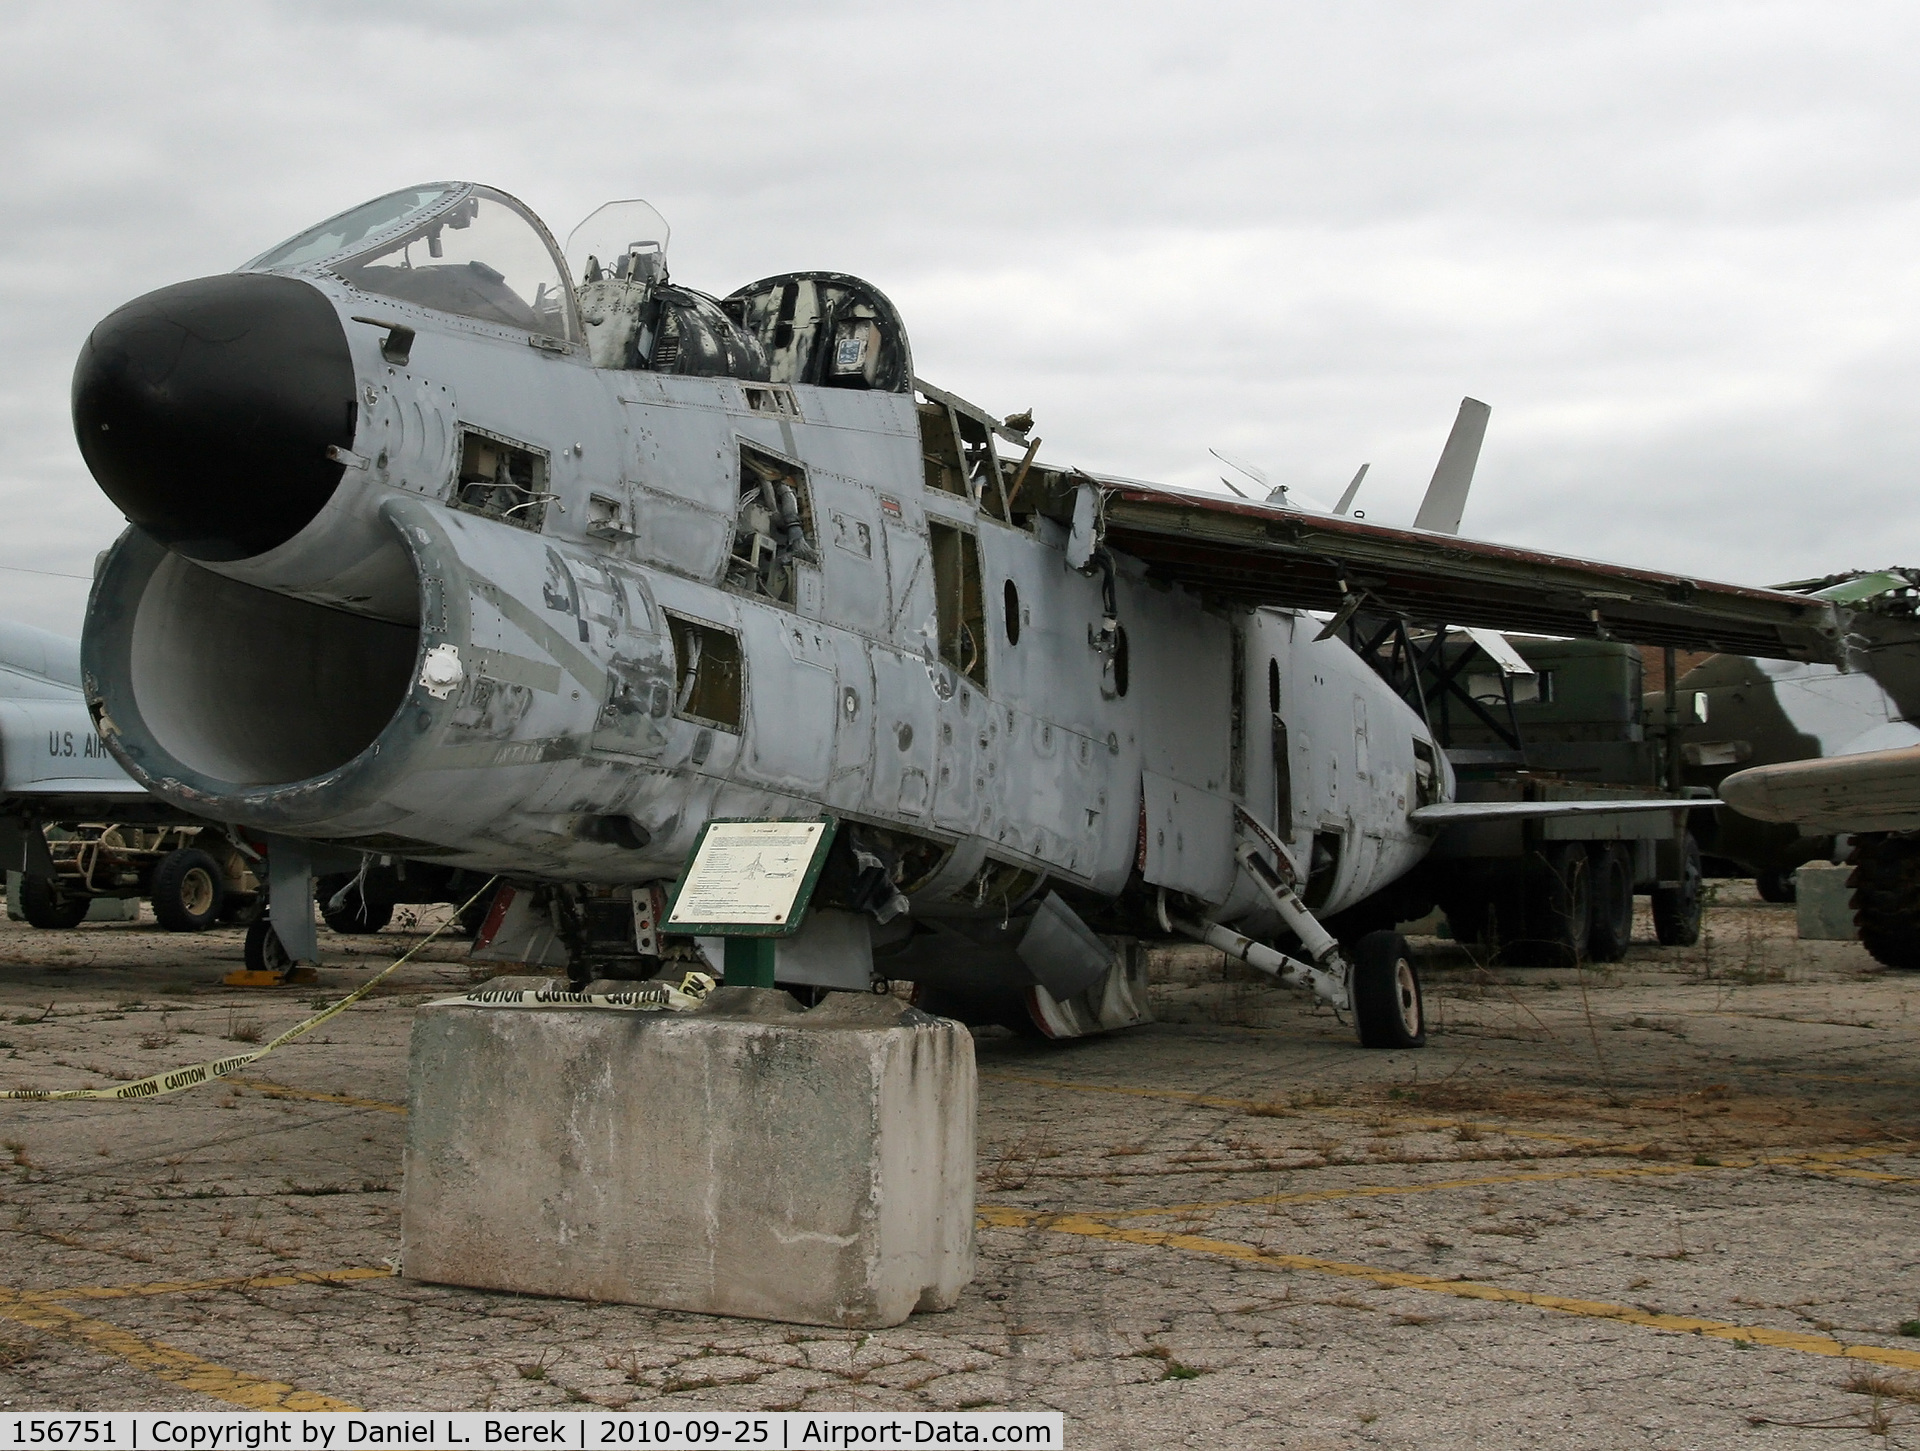 156751, LTV TA-7C Corsair II C/N E-018, This former Navy plane has shed so many of her parts, so as to be barely recognizable.